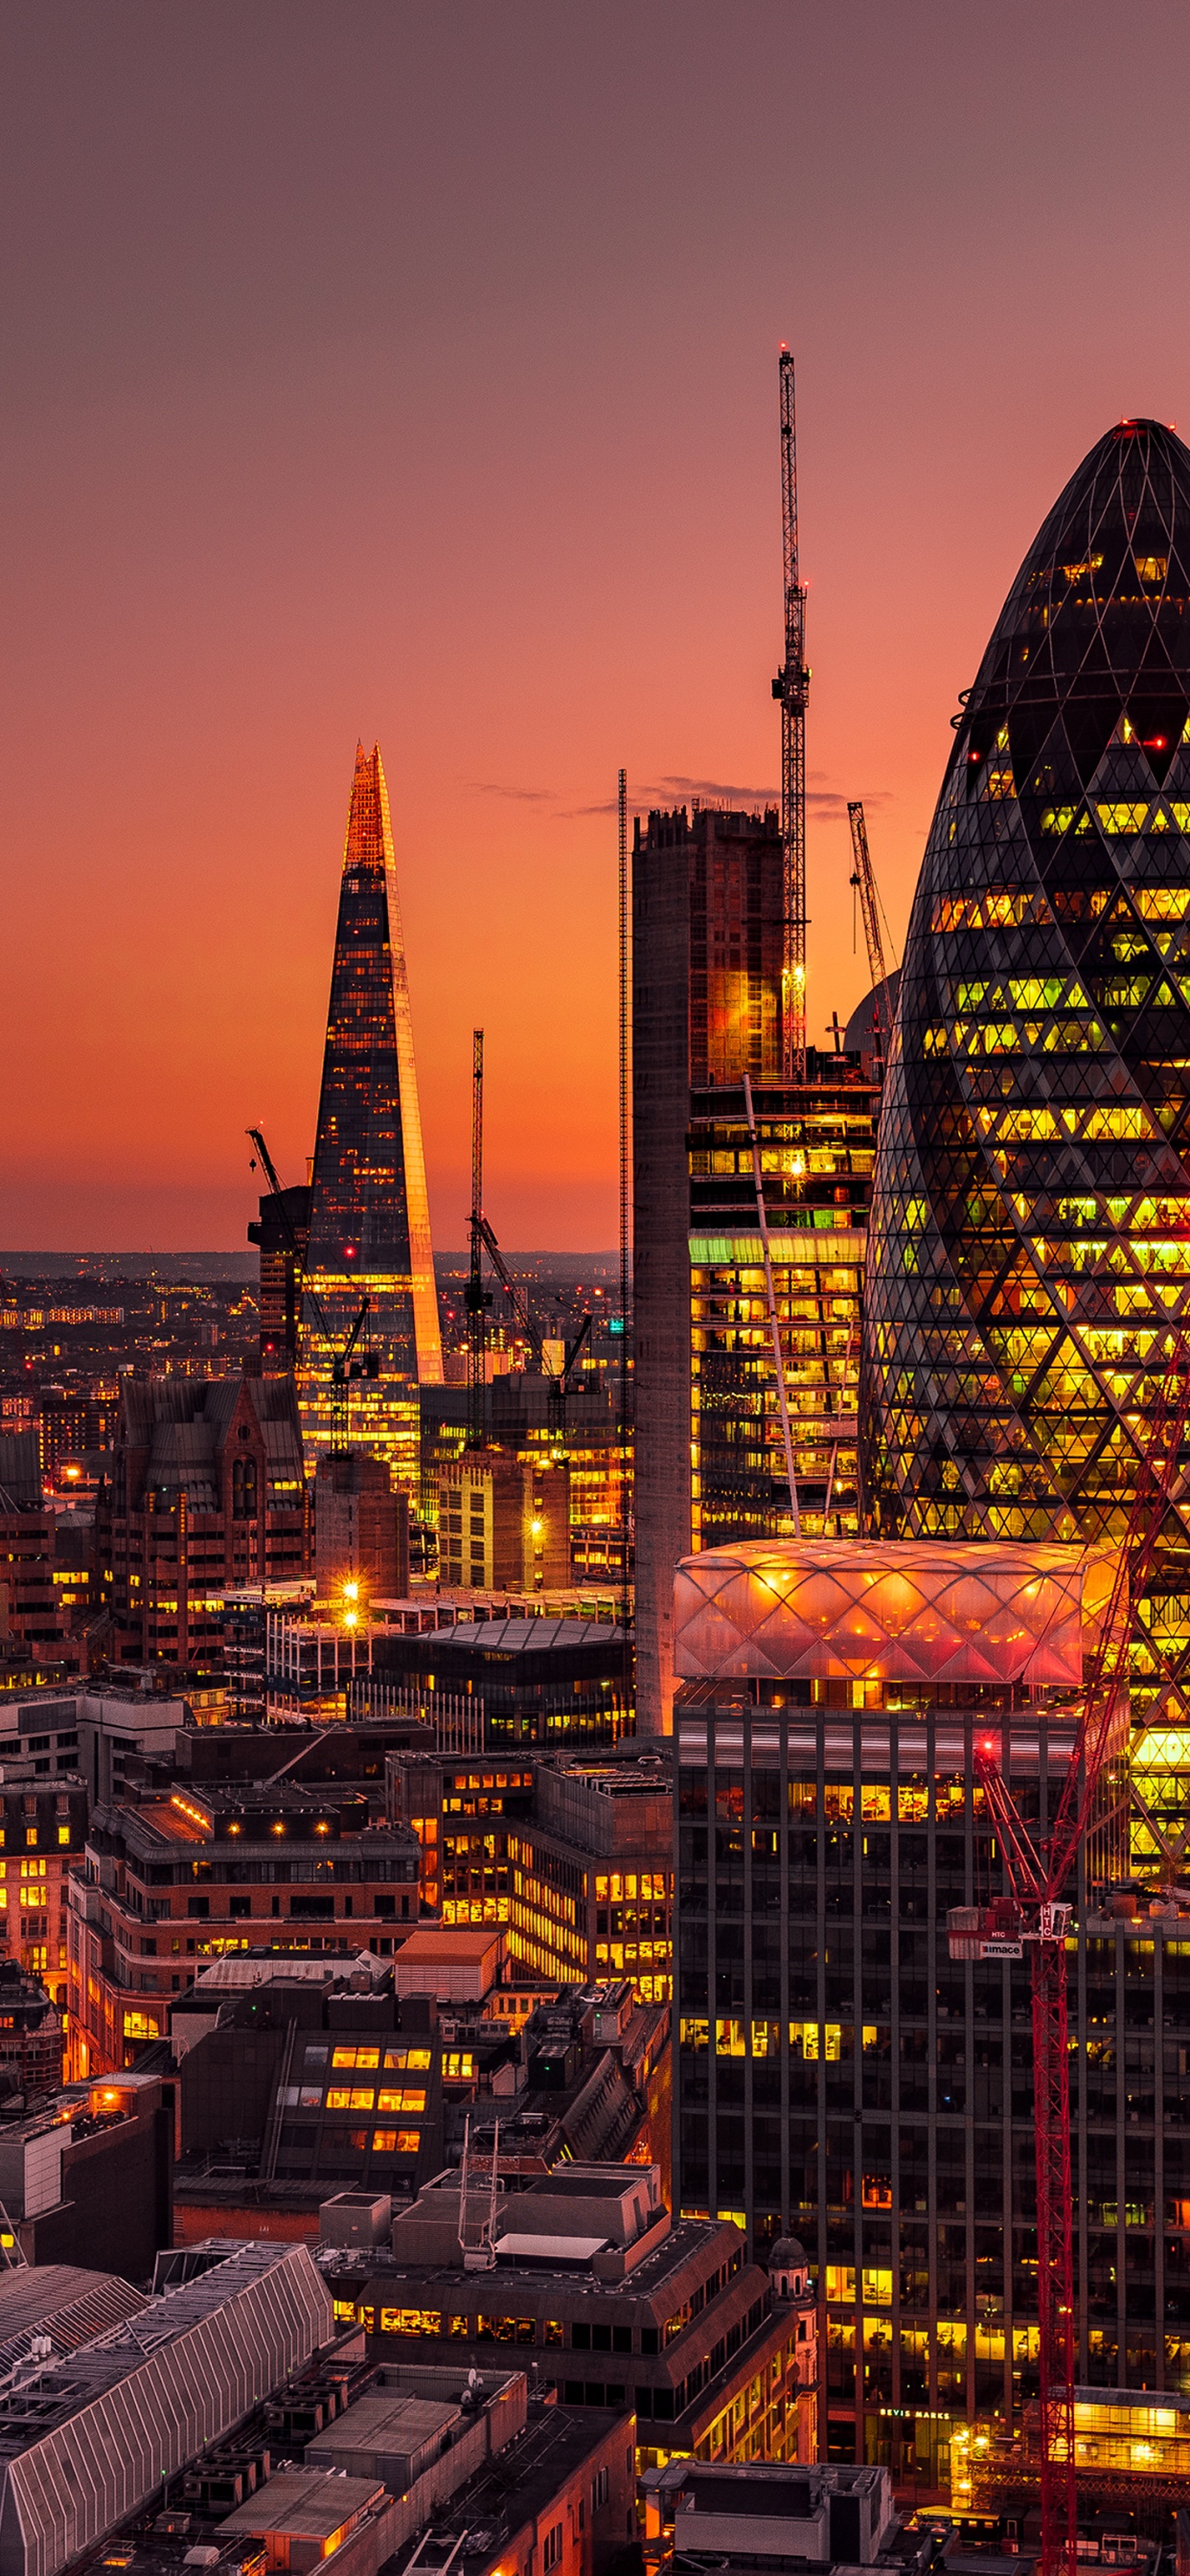 London, 30 st Mary Axe The Gherkin, The Shard, The Leadenhall Building, Skyscraper. Wallpaper in 1242x2688 Resolution